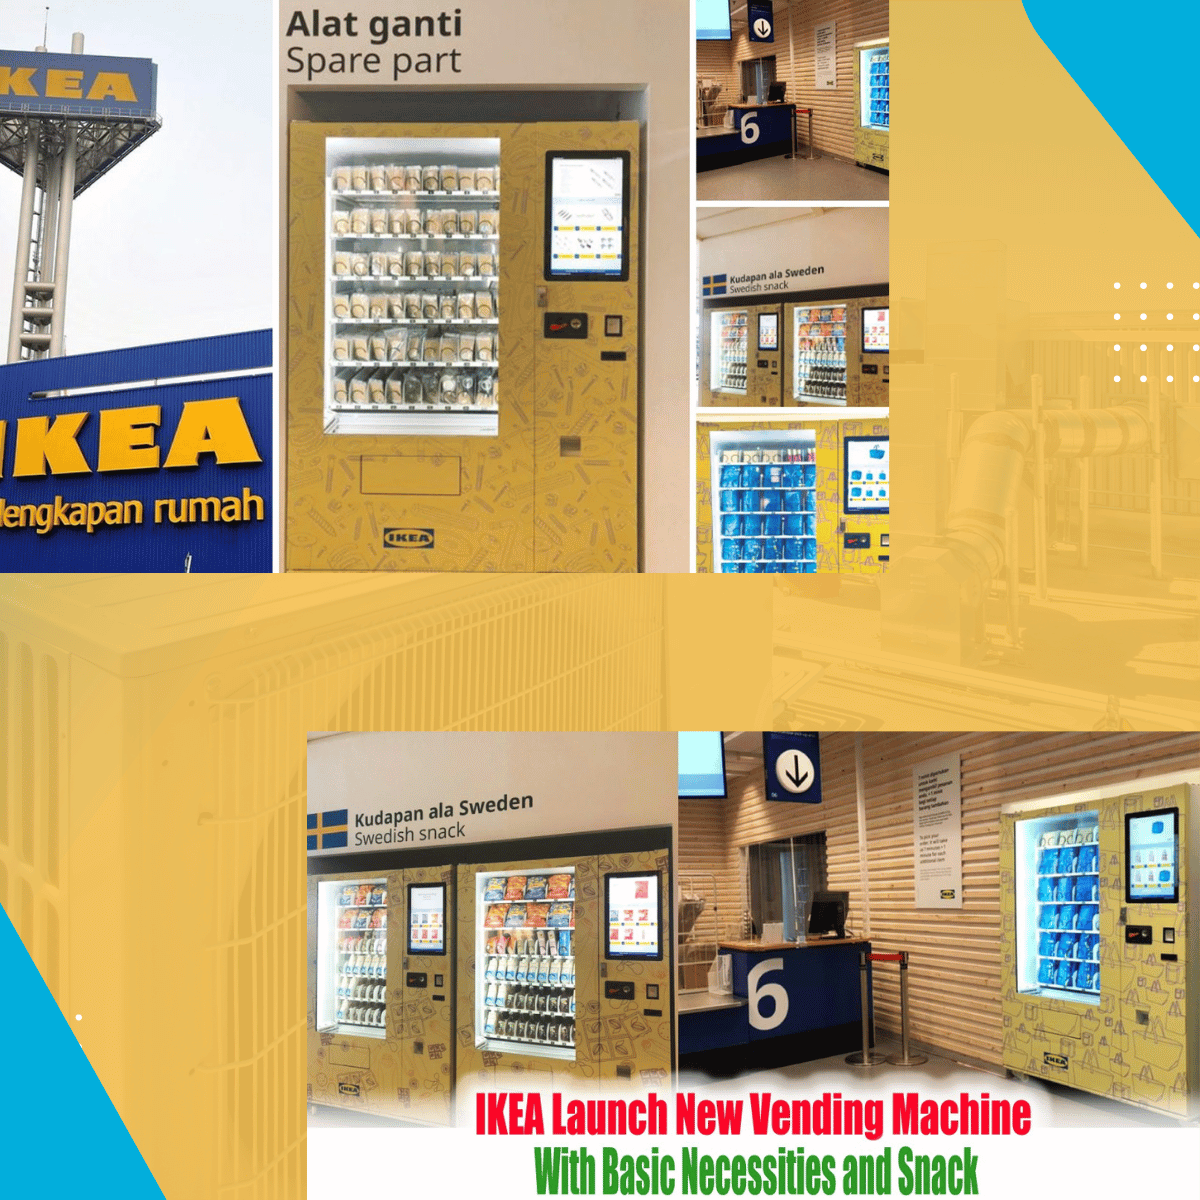 VENDING IN THE NEWS: IKEA SHOWS OFF NEW MACHINES